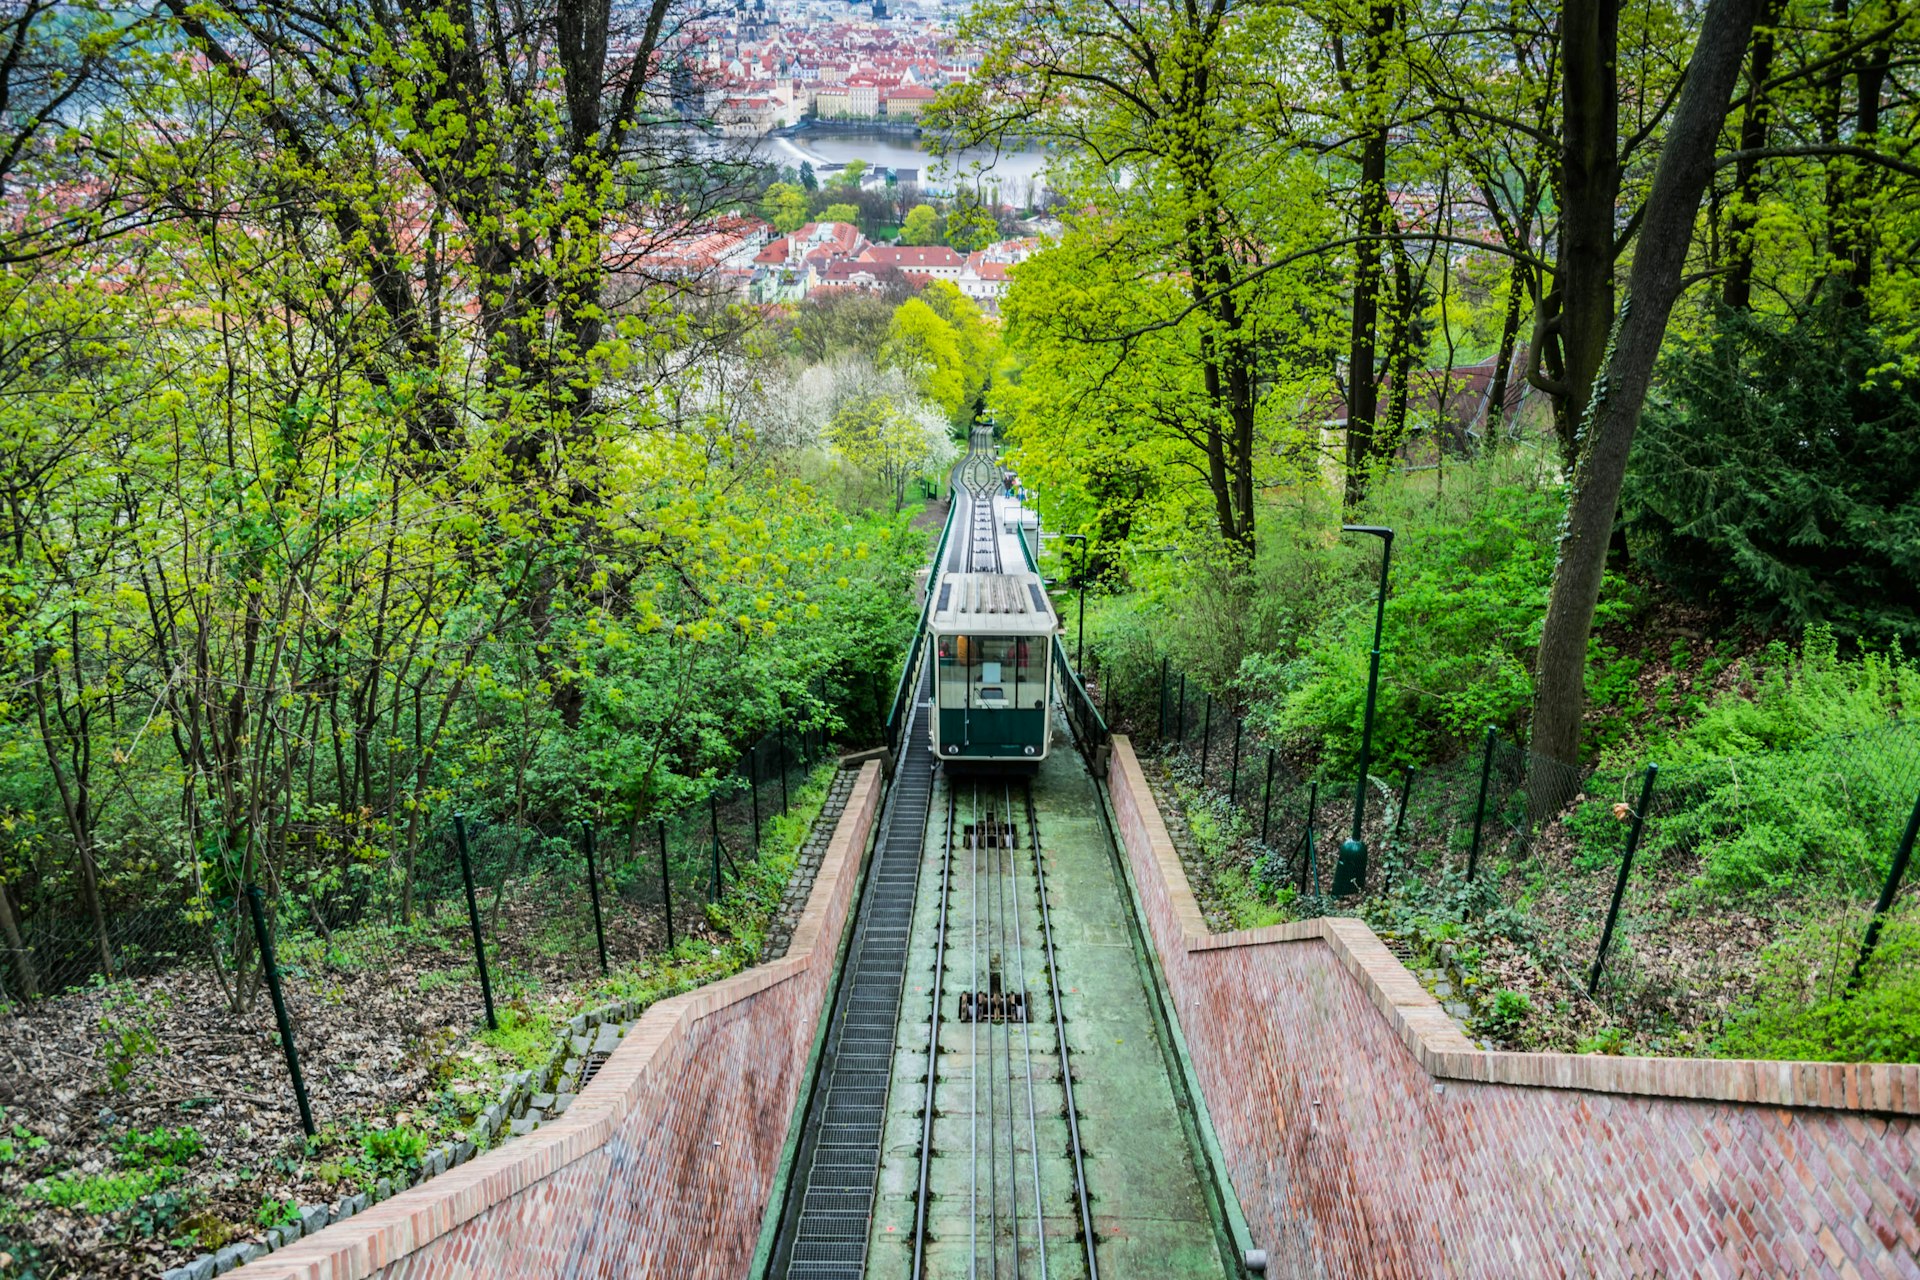 A shot down a funicular track towards a green train carriage